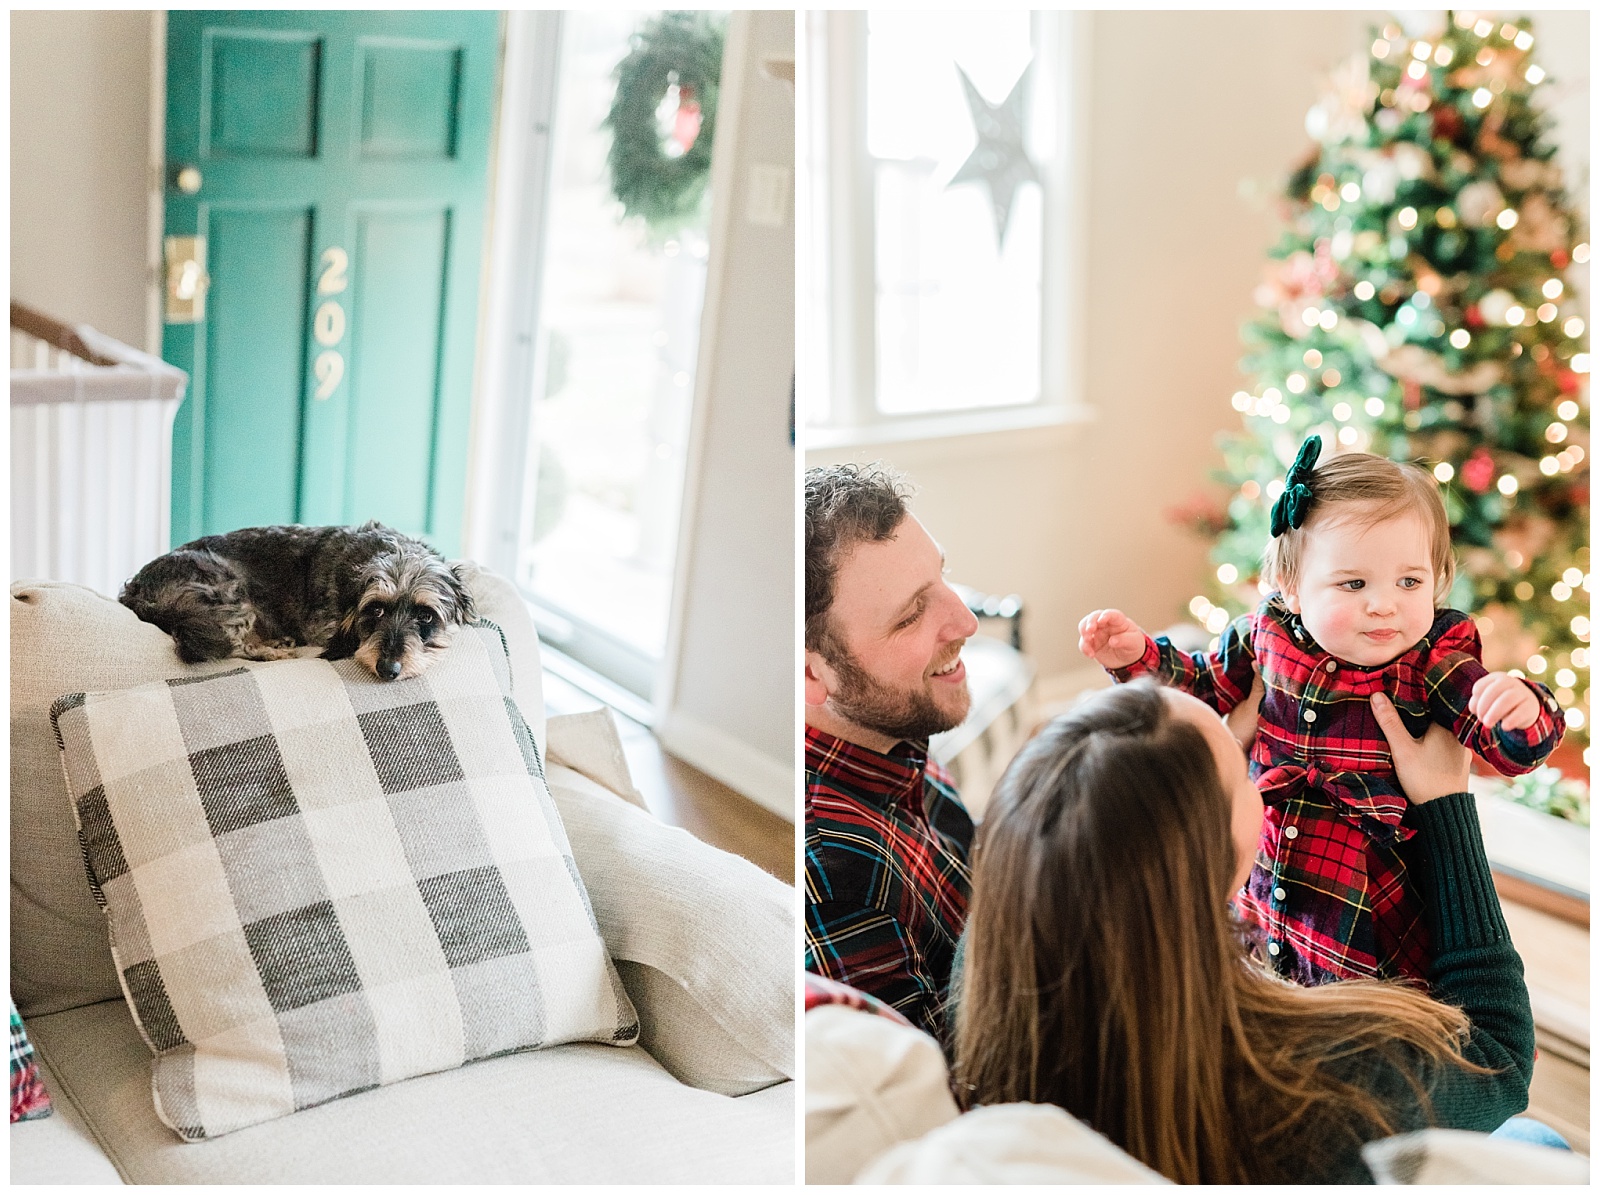 in-home-family-holiday-session-winter-christmas-cozy-photographer-nj-new-jersey-photo_0019.jpg